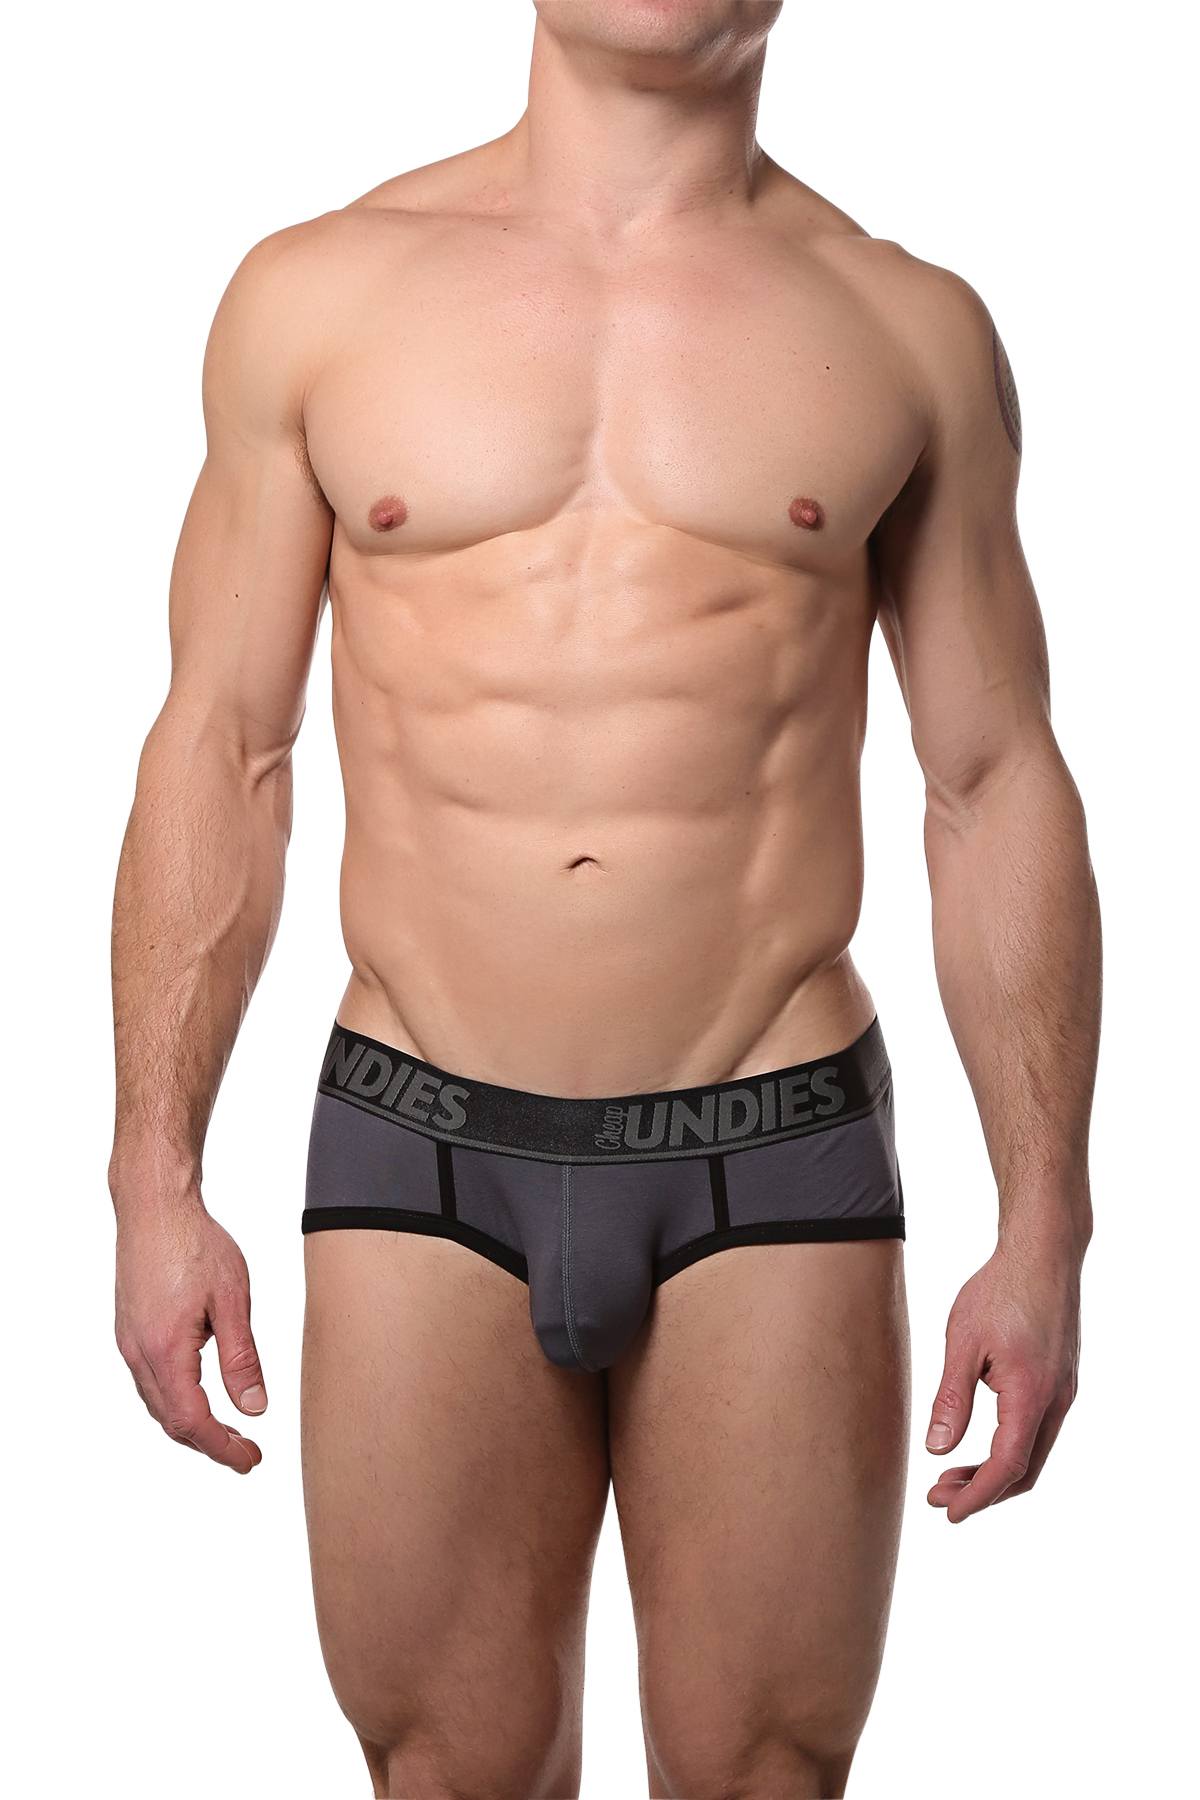 CheapUndies Charcoal Touch Brief